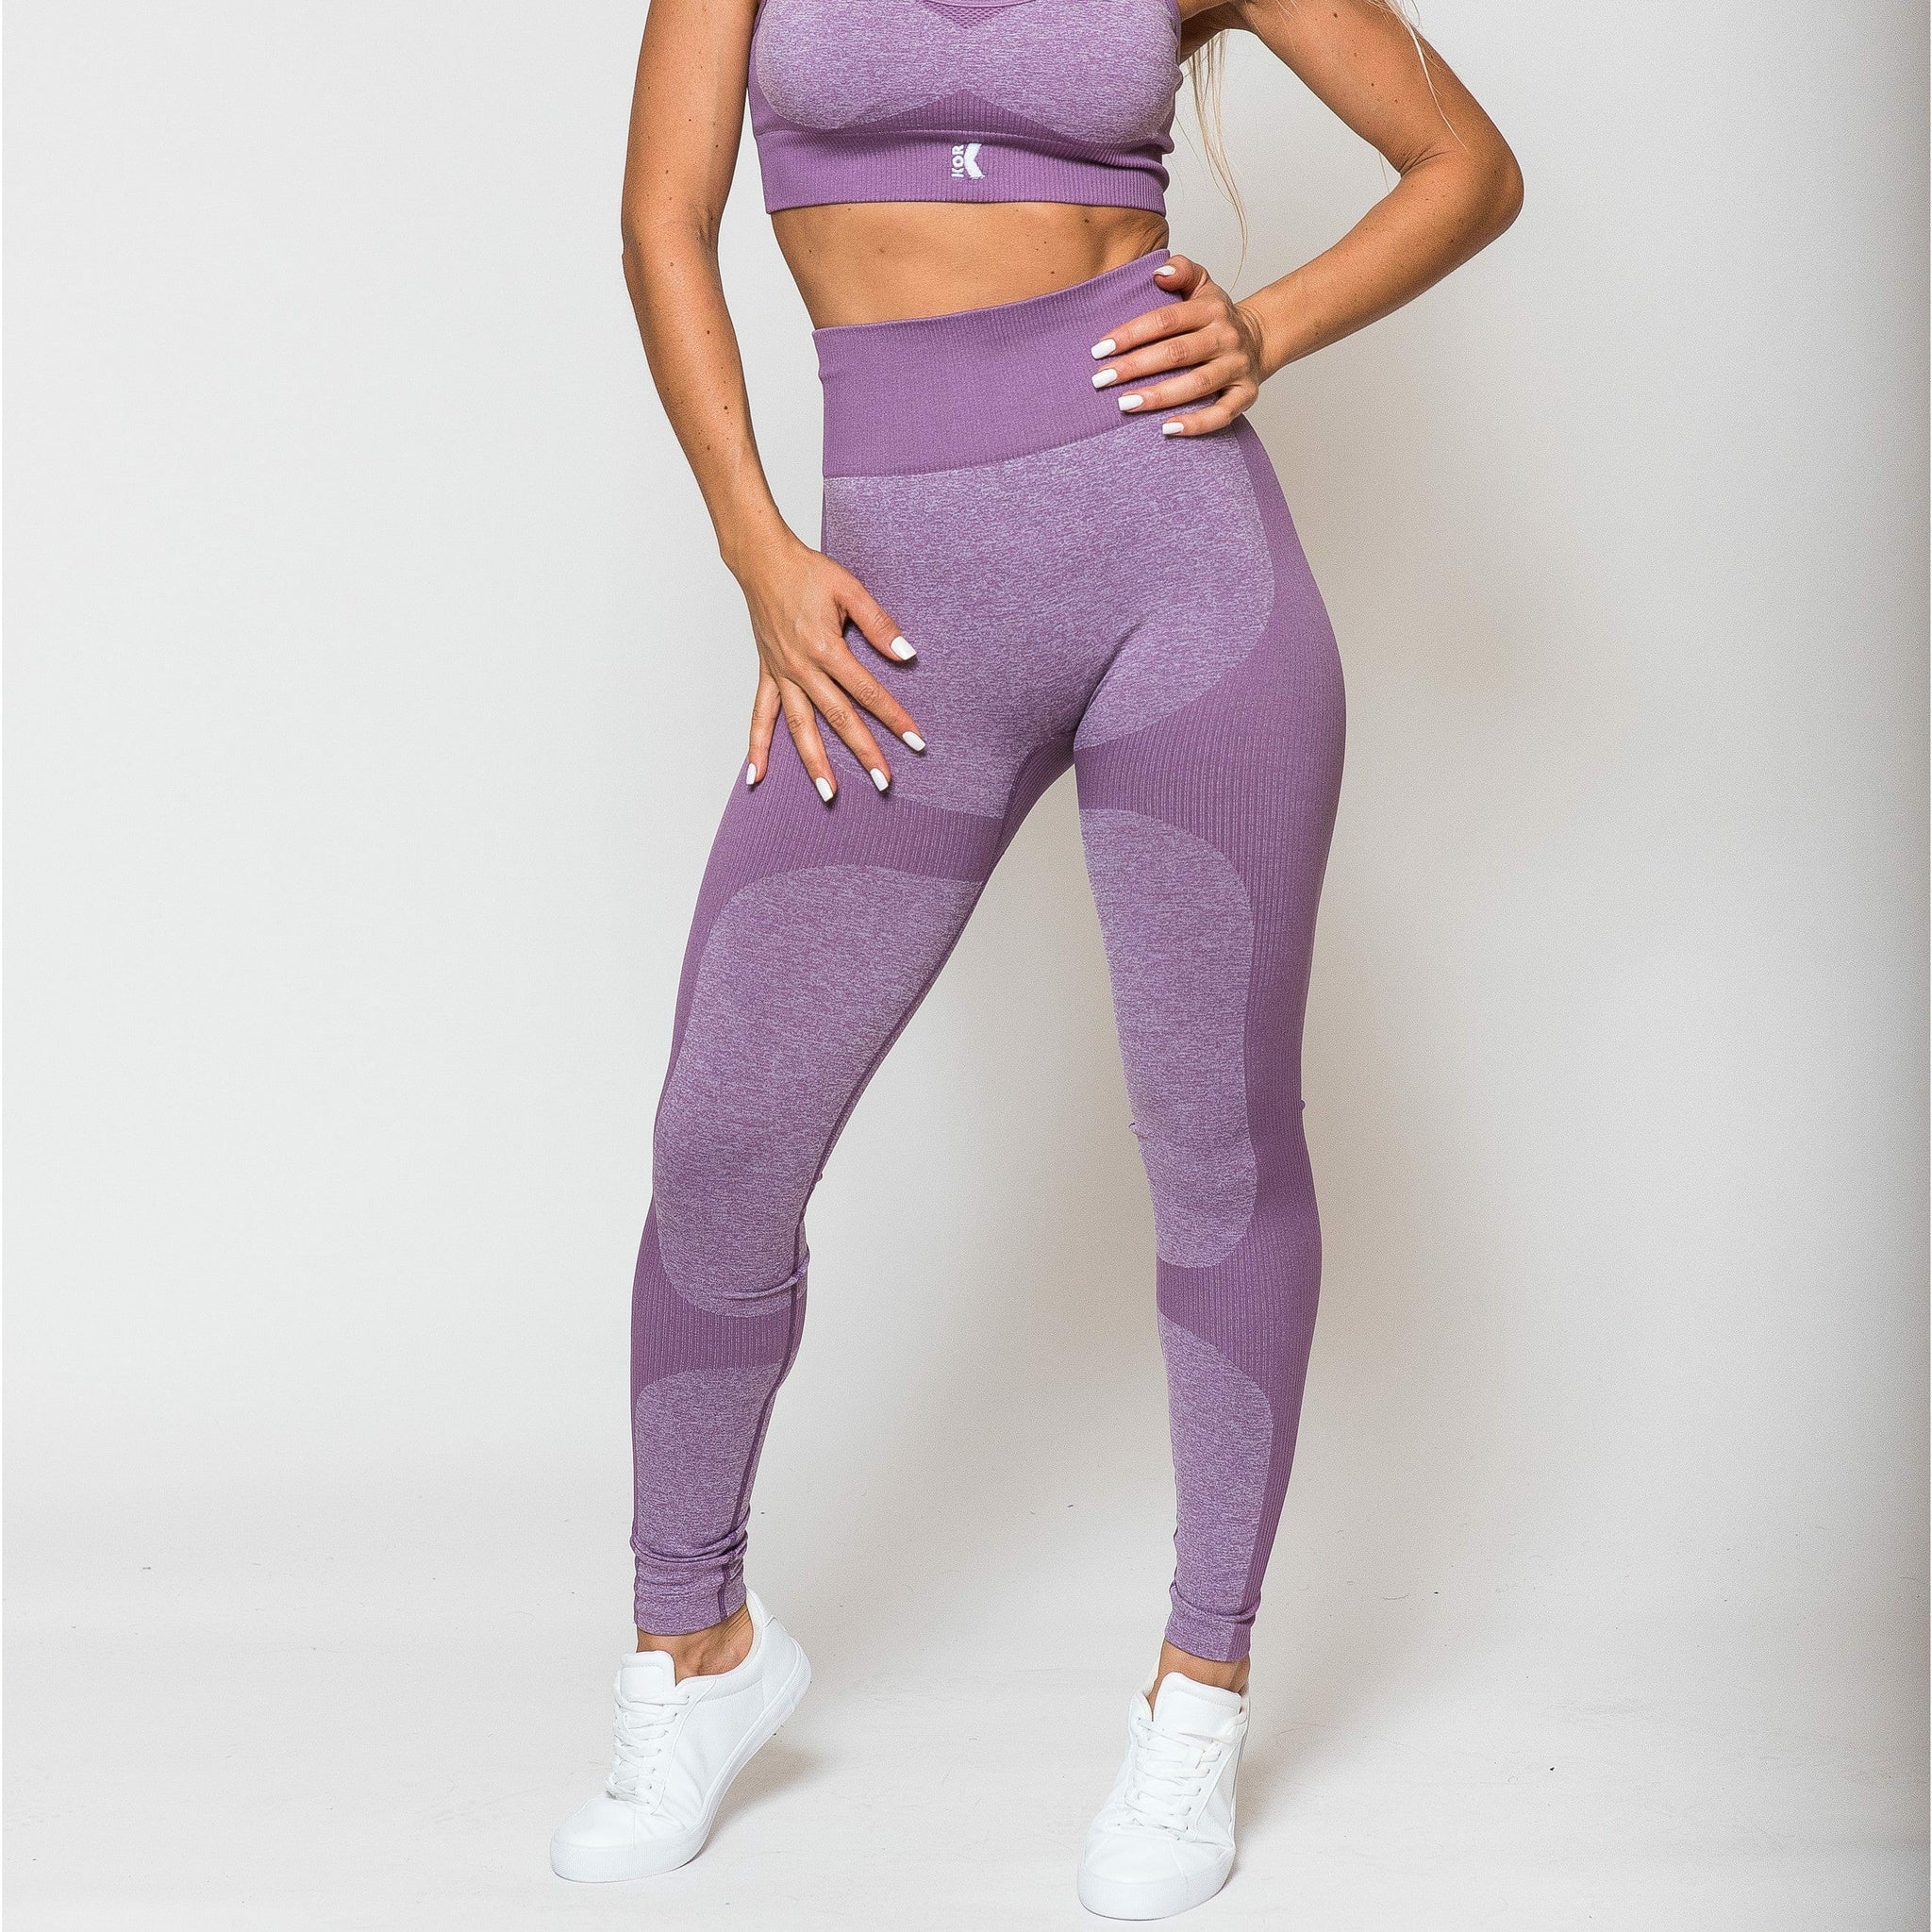 Womens Ribbed Seamless Leggings High Waisted For Exercise Gym Workout Yoga  Running by MAXXIM Purple Medium